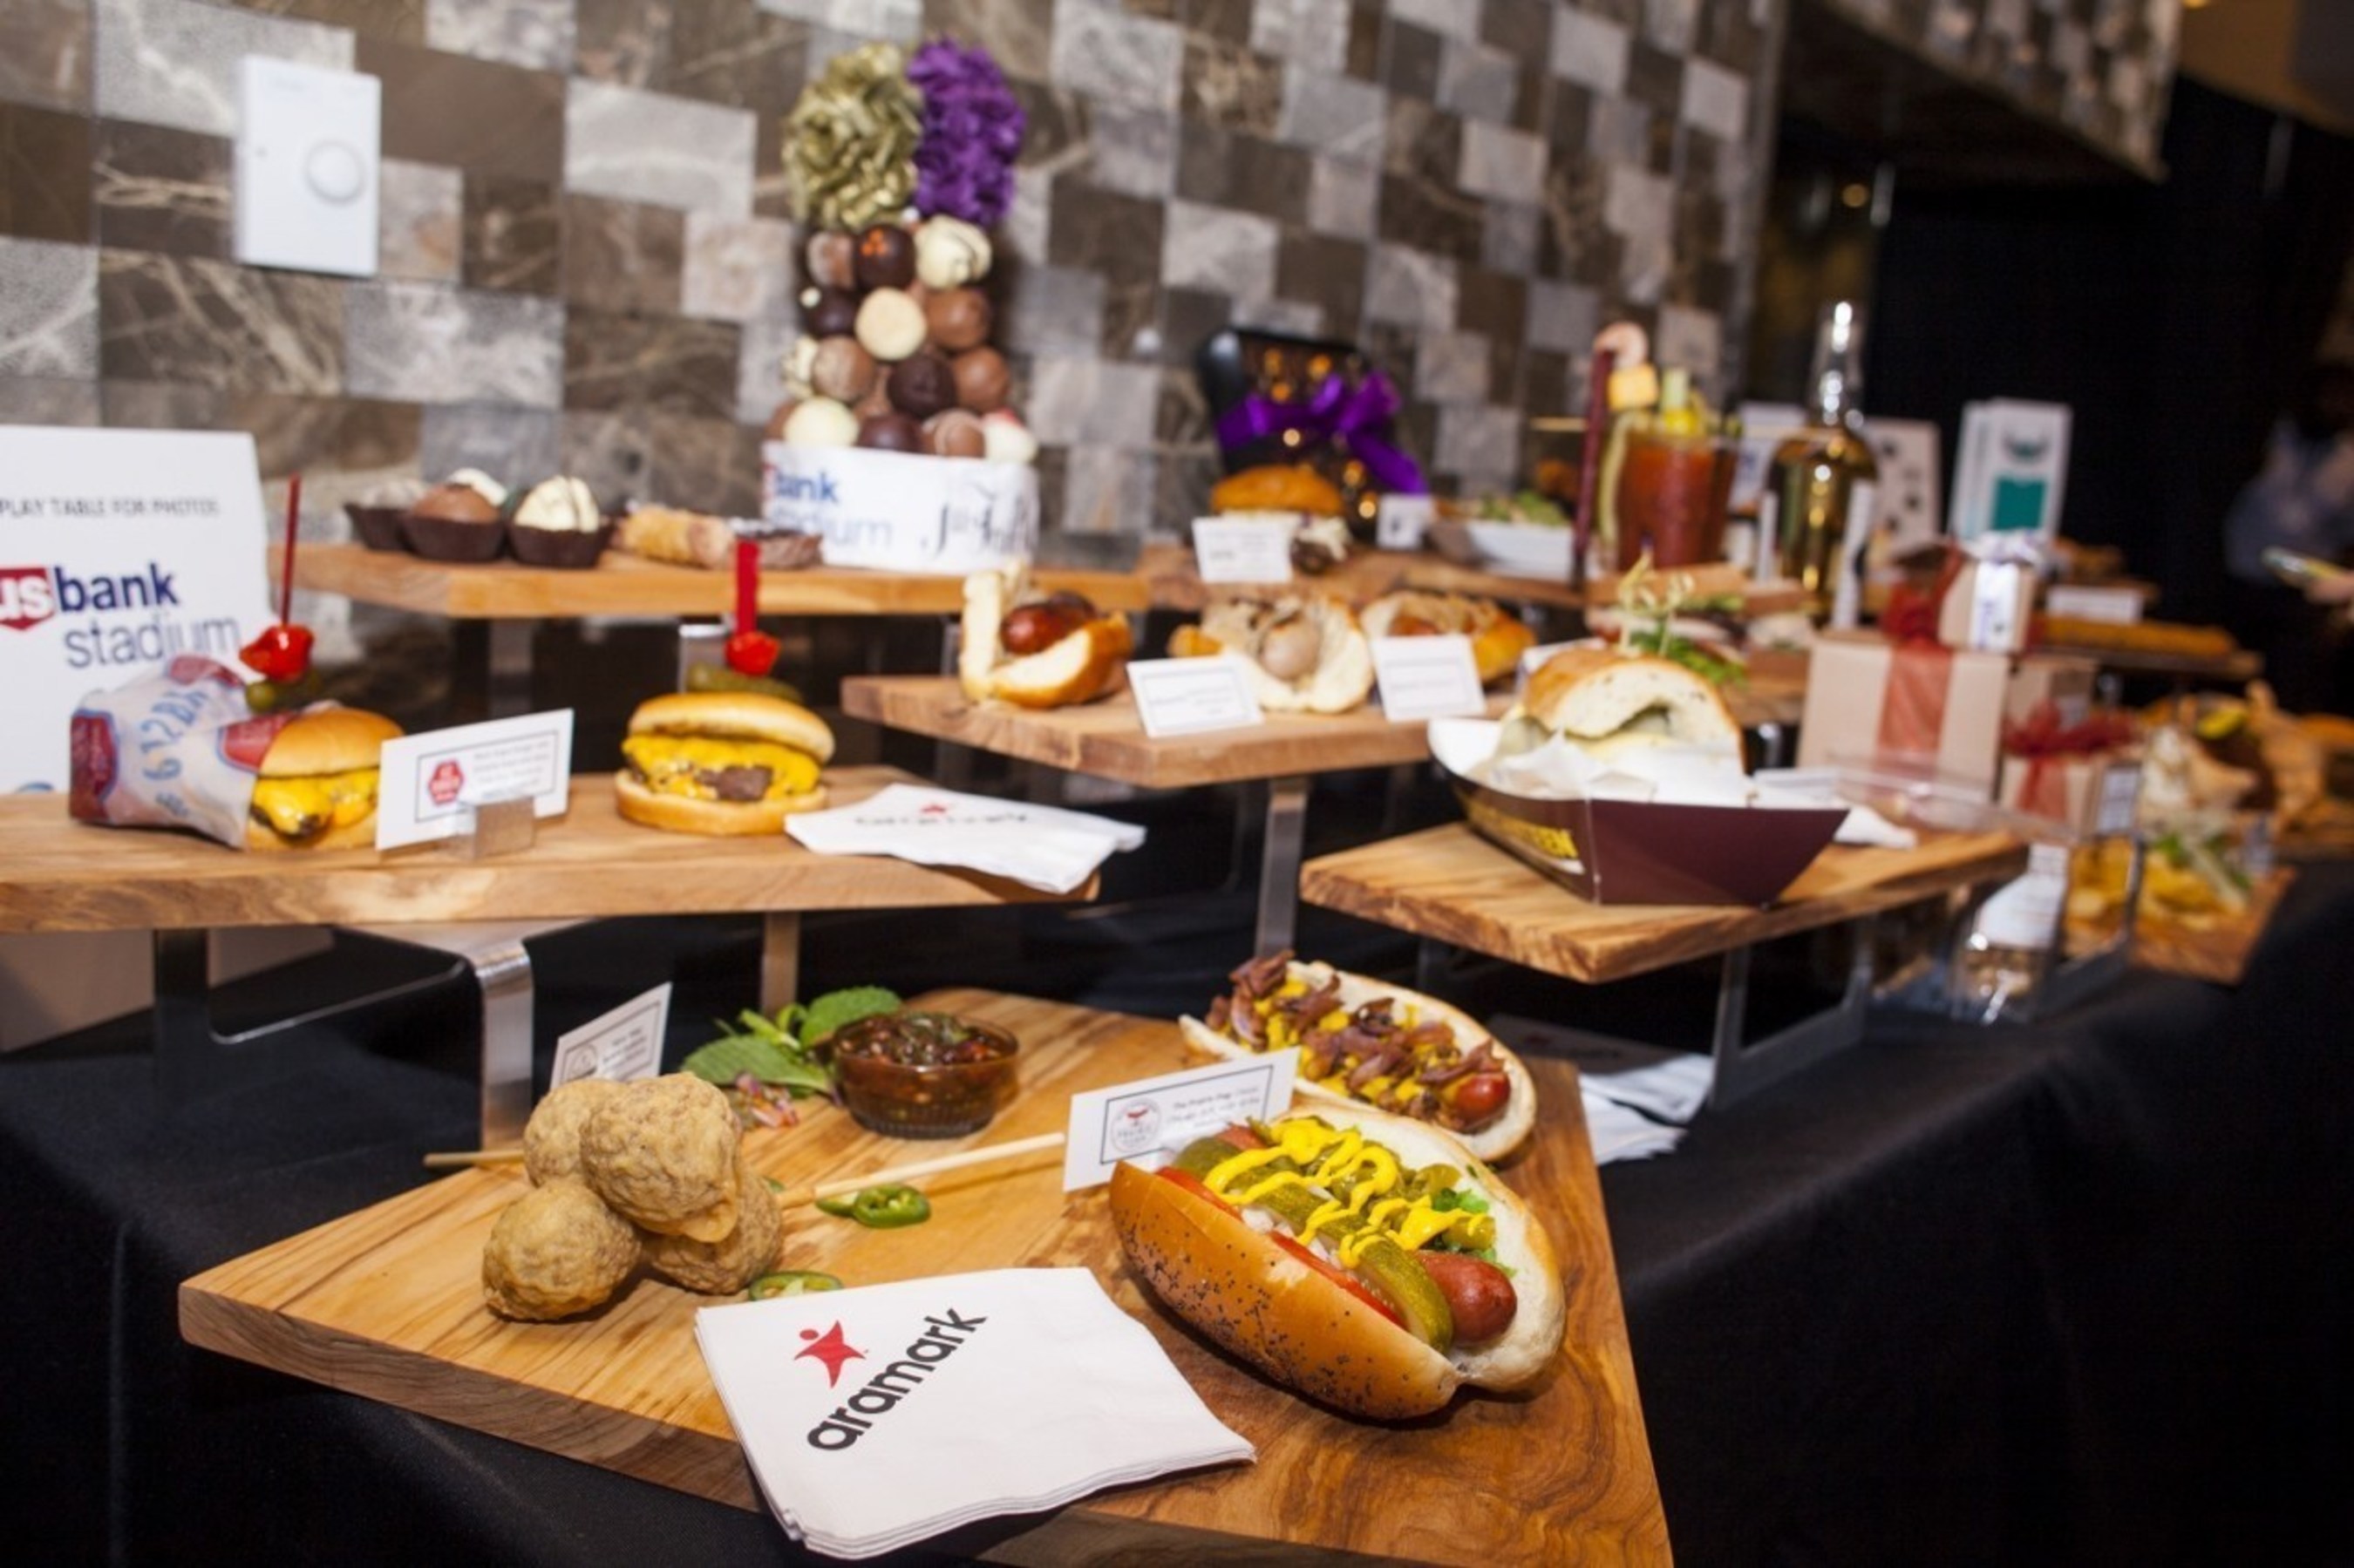 Aramark, Minnesota Sports Facilities Authority, Minnesota Vikings and SMG today unveil a savory stadium menu for the new U.S. Bank Stadium, featuring more than 20 restauranteurs, caterers and small business owners from the Twin Cities.